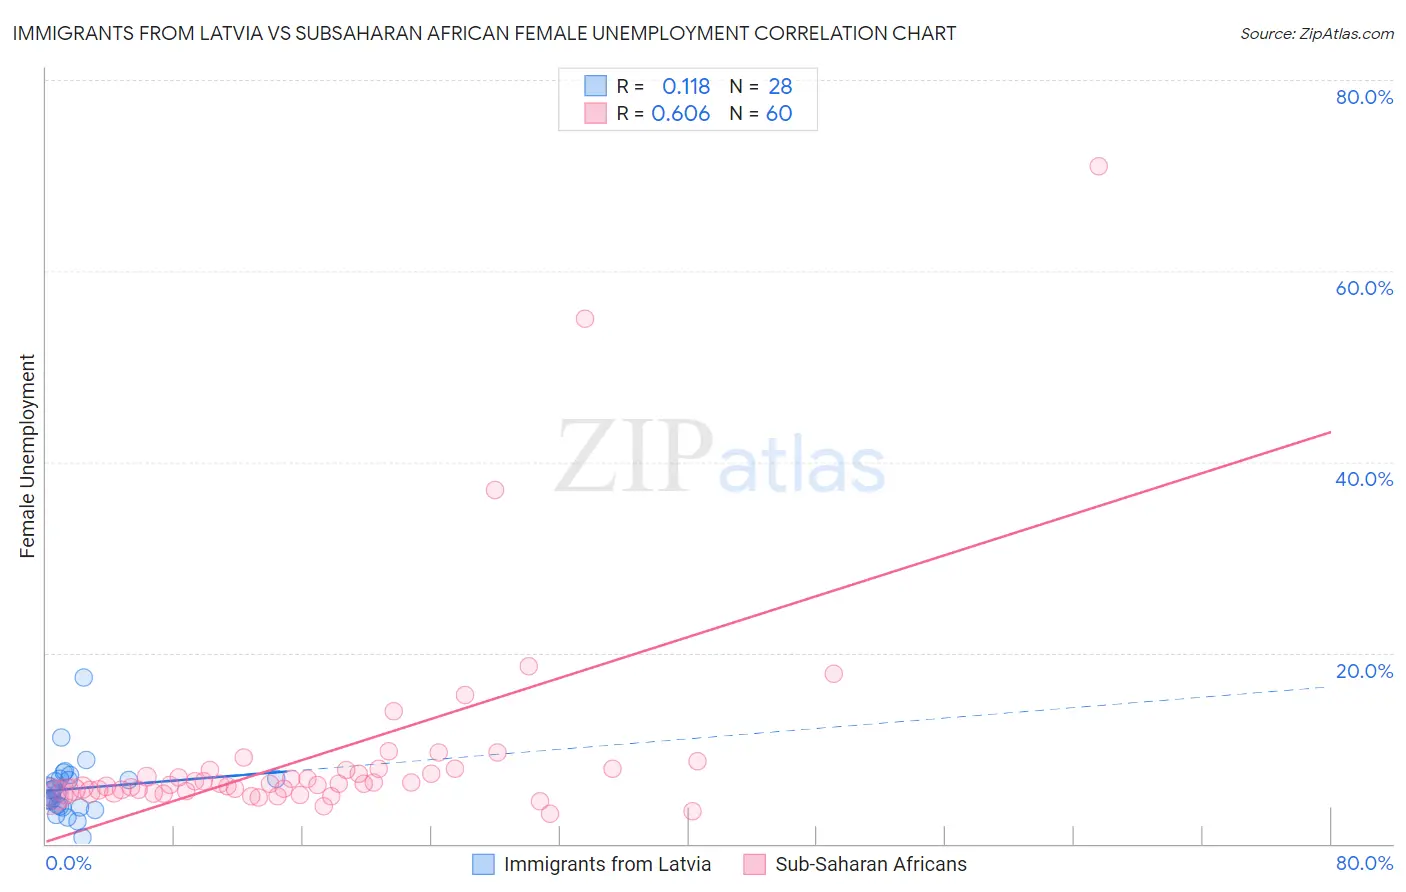 Immigrants from Latvia vs Subsaharan African Female Unemployment